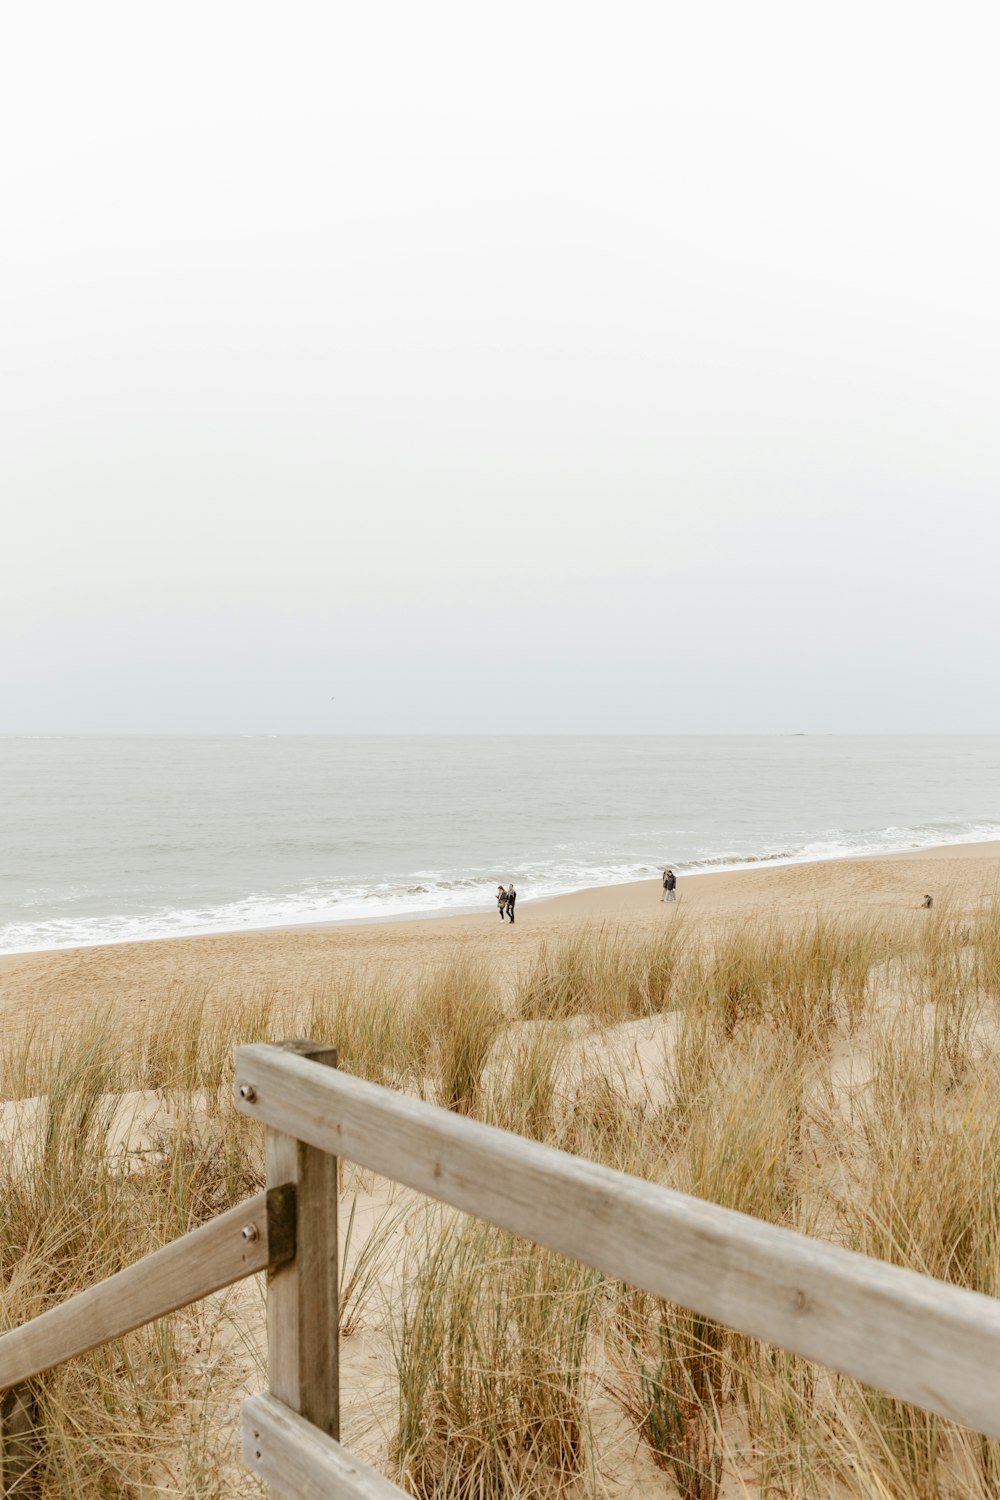 a view of a beach from behind a wooden fence